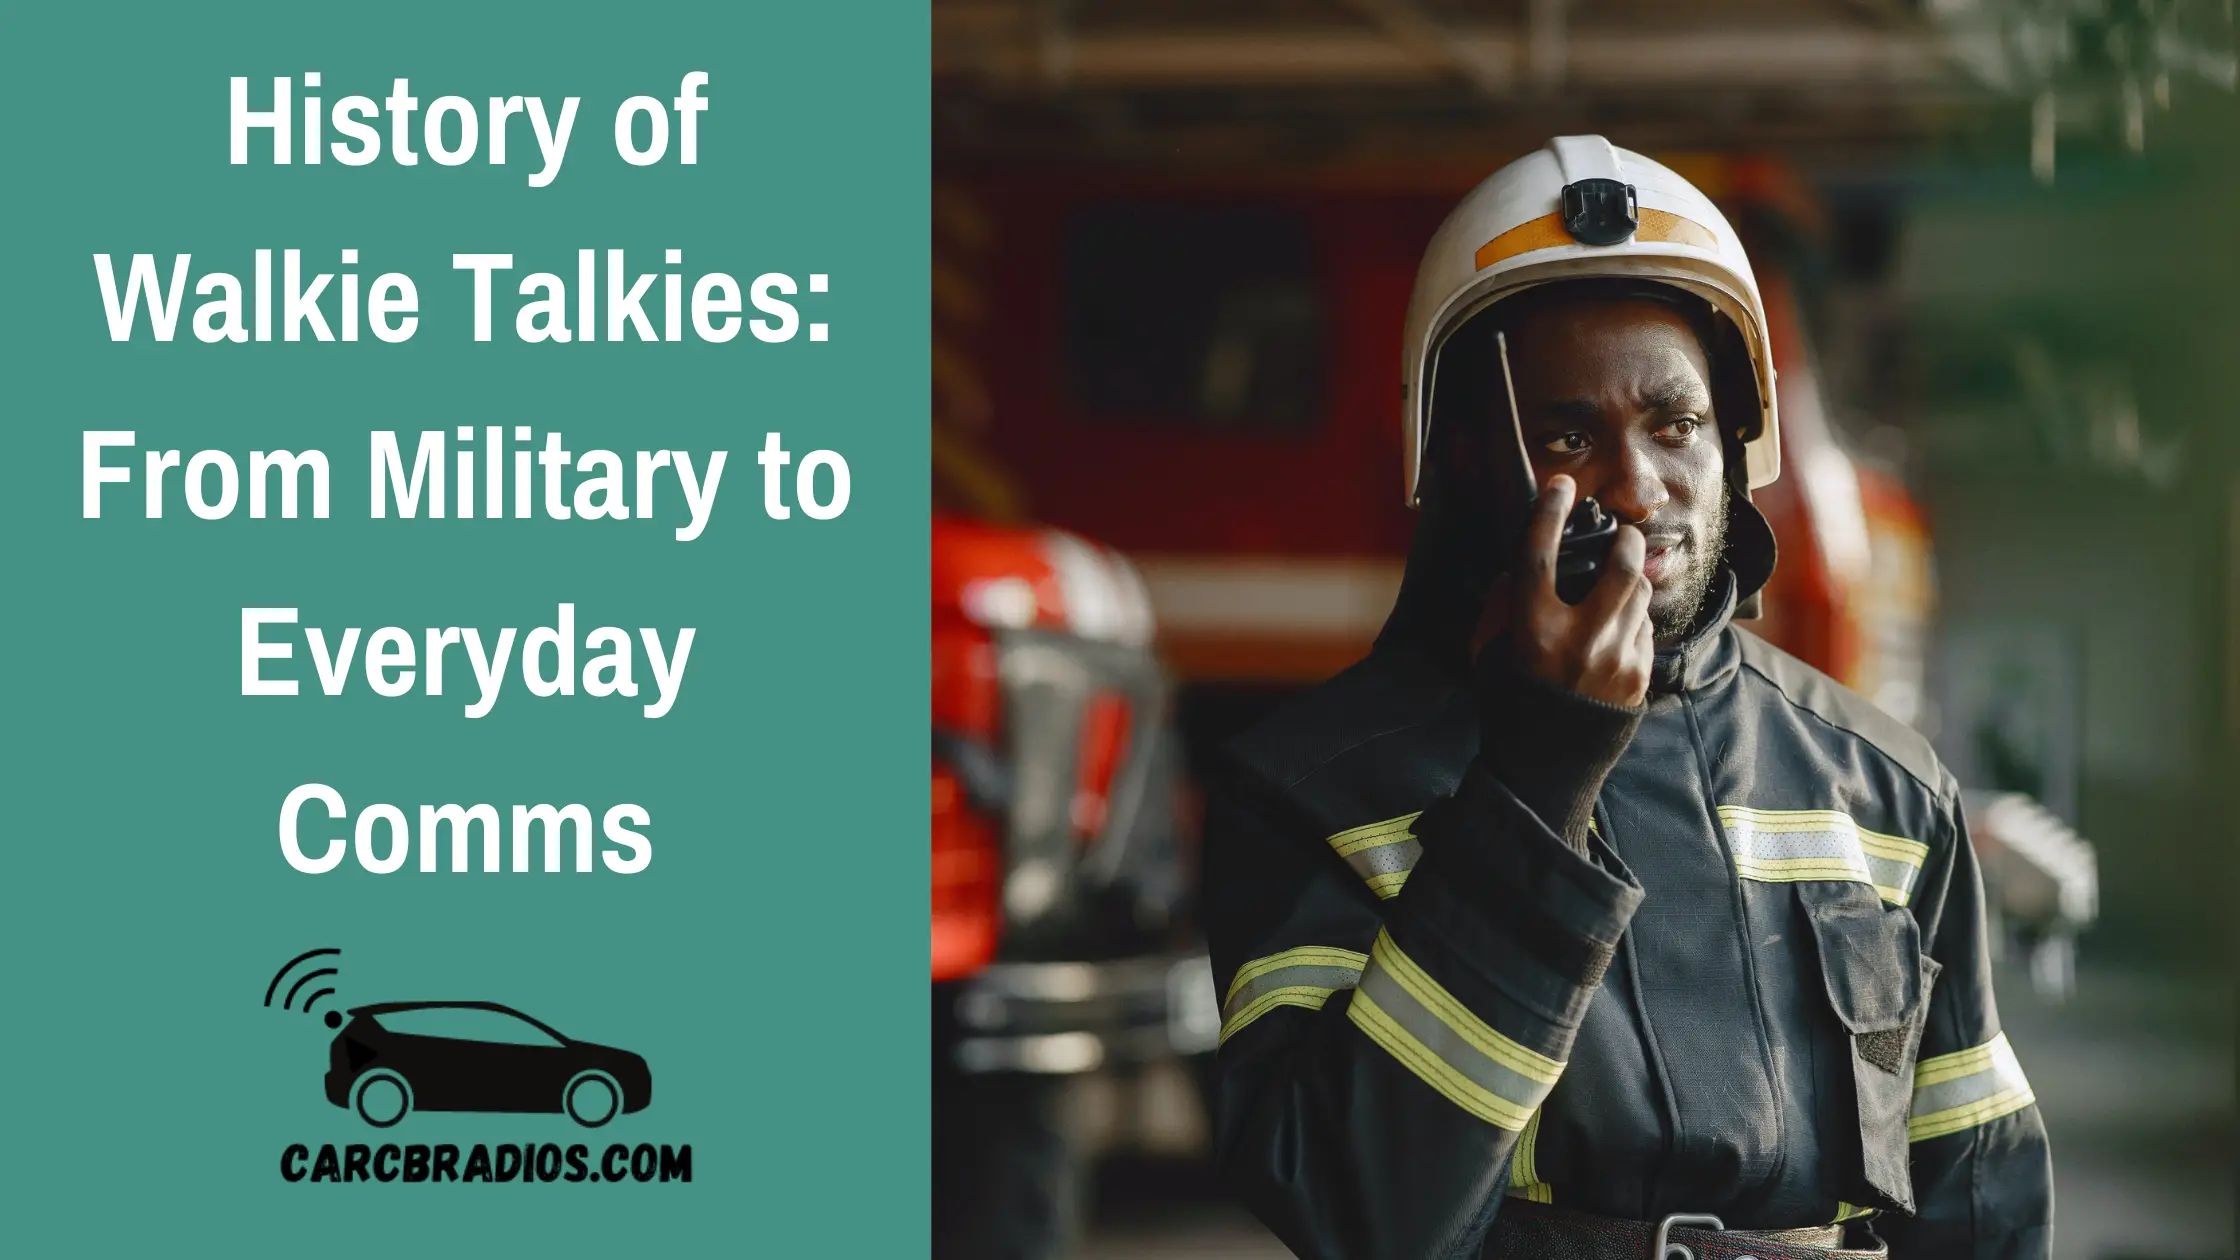 Today's walkie-talkies come in a variety of shapes, colours, sizes, and with many different features to choose from. From wartime developments to modern-day two-way radios, these devices have come a long way and continue to be an important tool for communication and collaboration in many different settings.